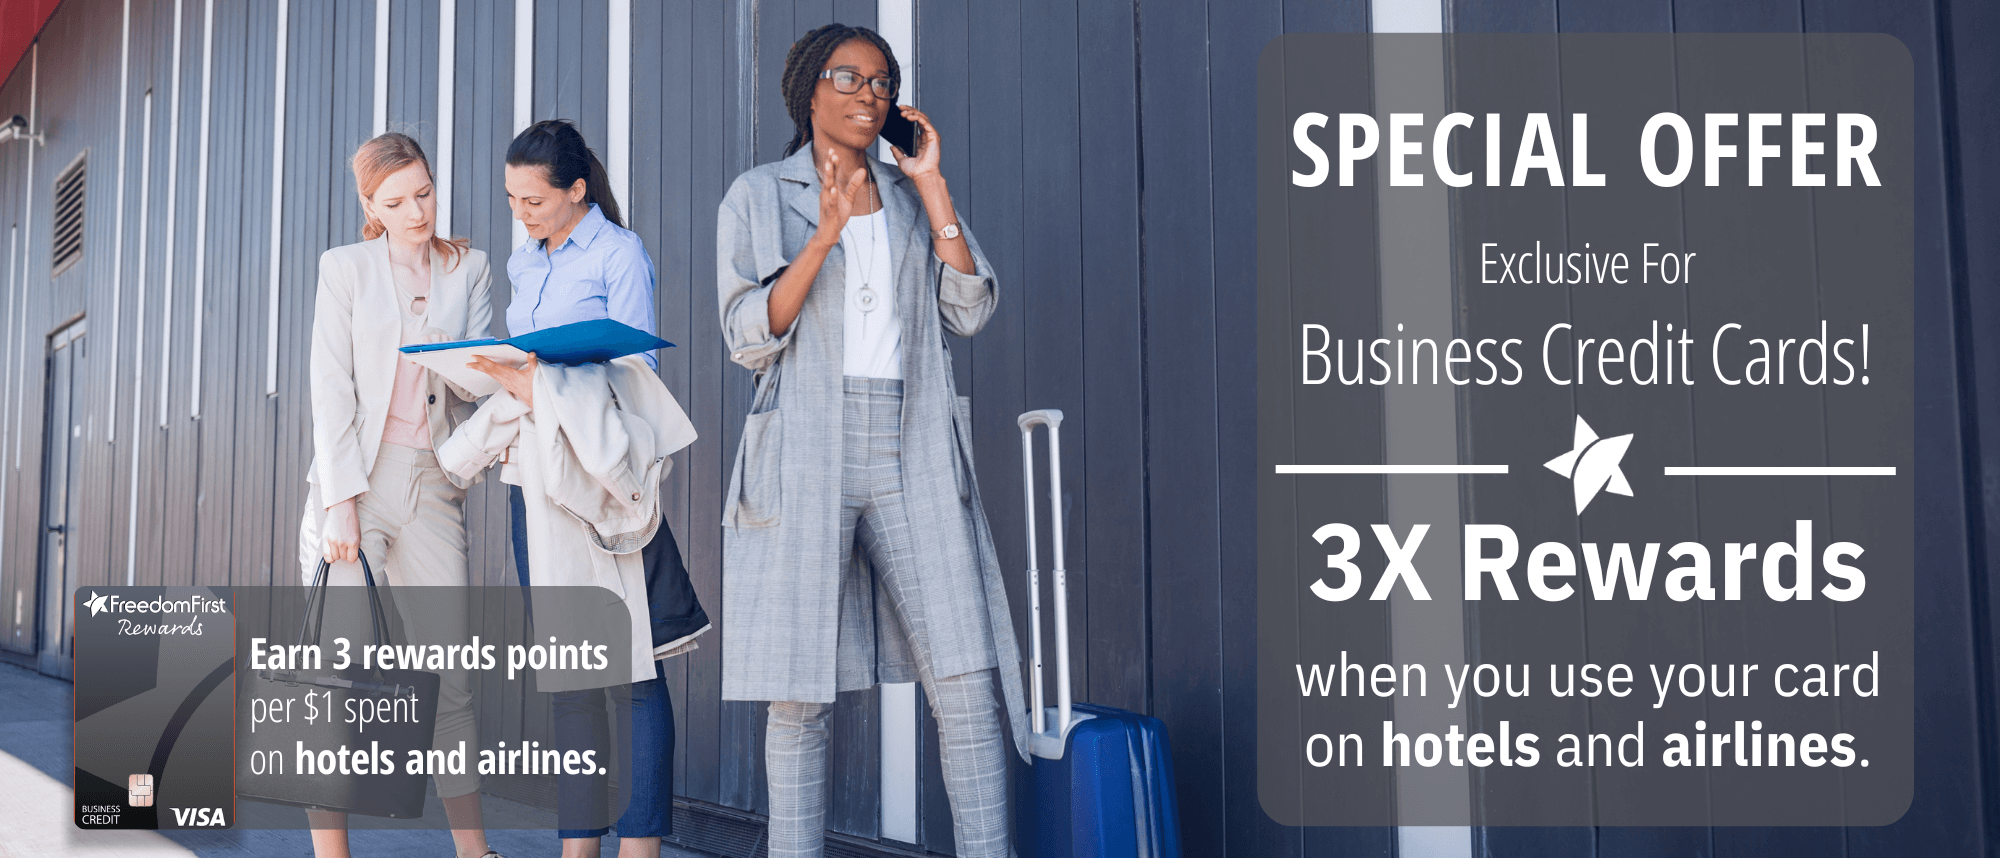 3X rewards when you use your card on hotels and airlines